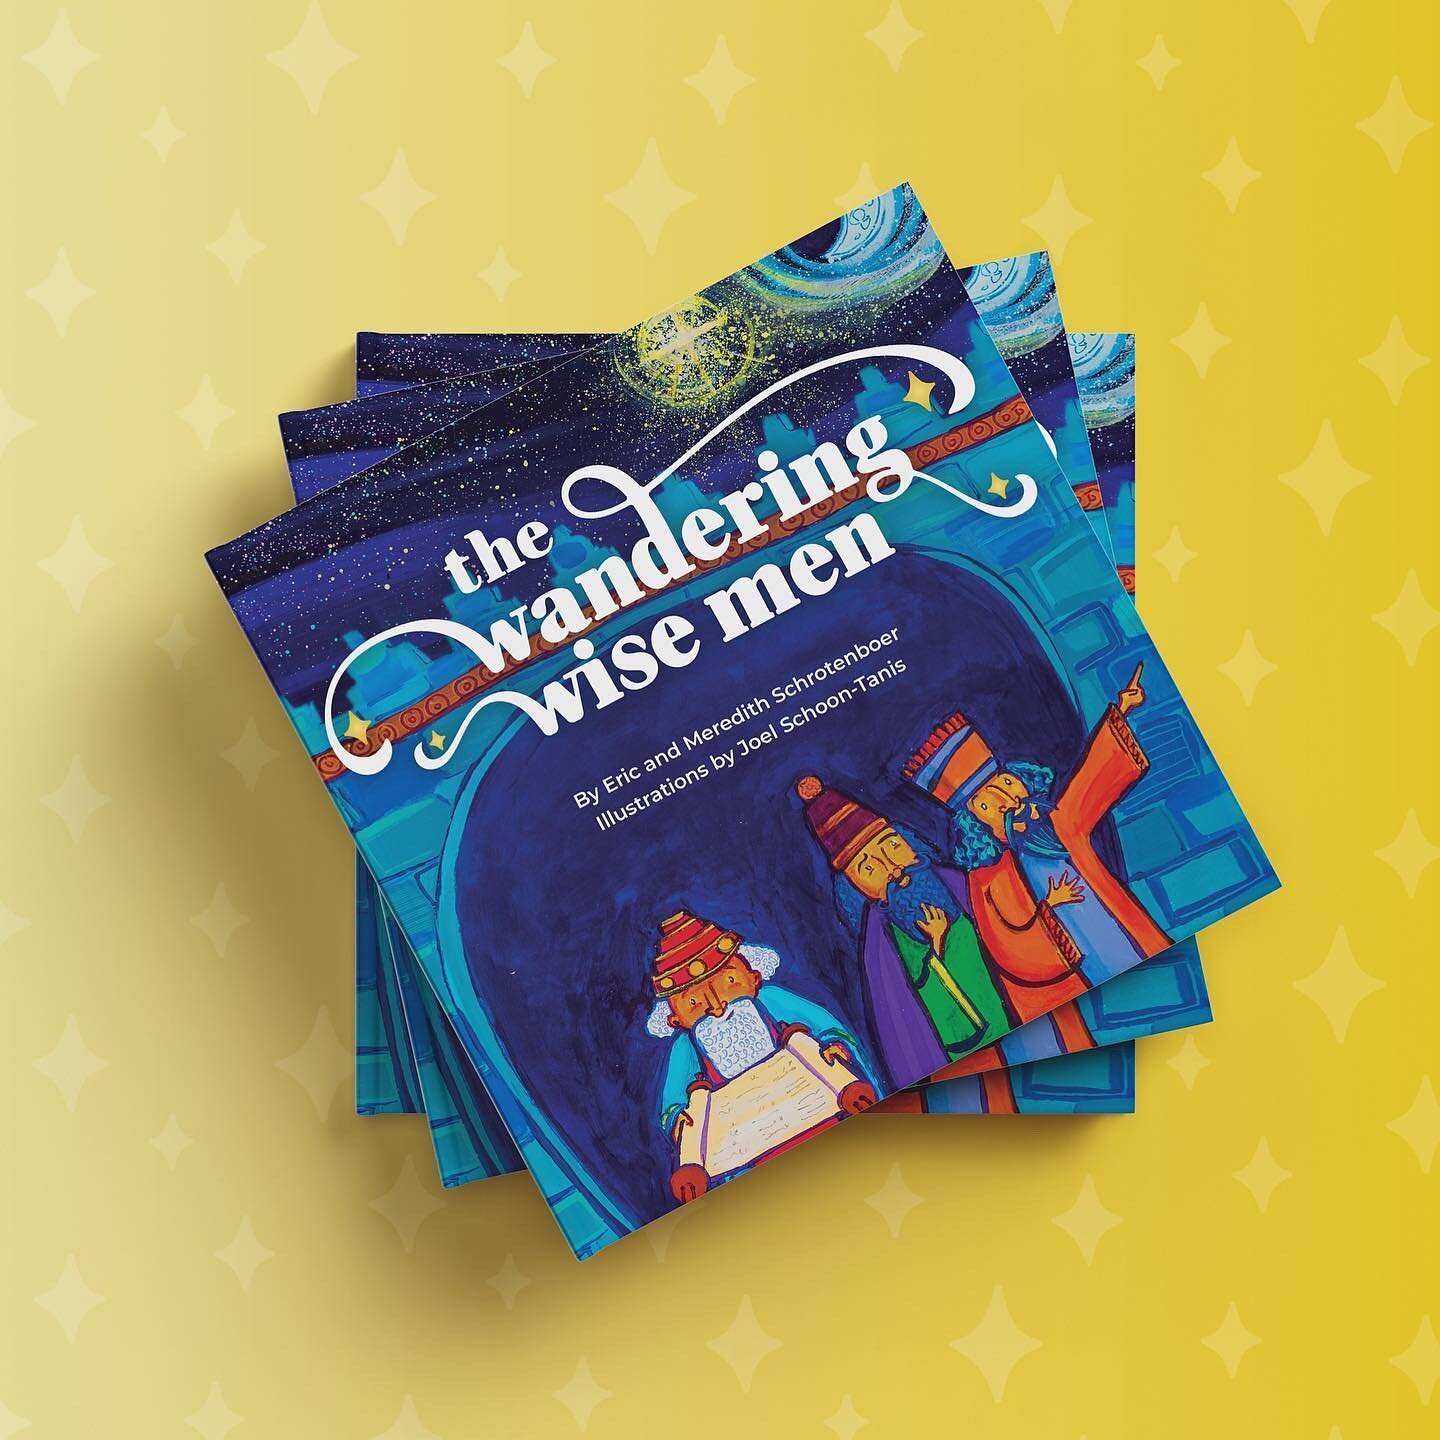 This vibrant picture book is part of The Wandering Wise Men Christmas activity set. The set also includes a 37-day family devotional that starts on December 1st, and 3 plush wise men toys to hide around the house. Our hope is that when families use t